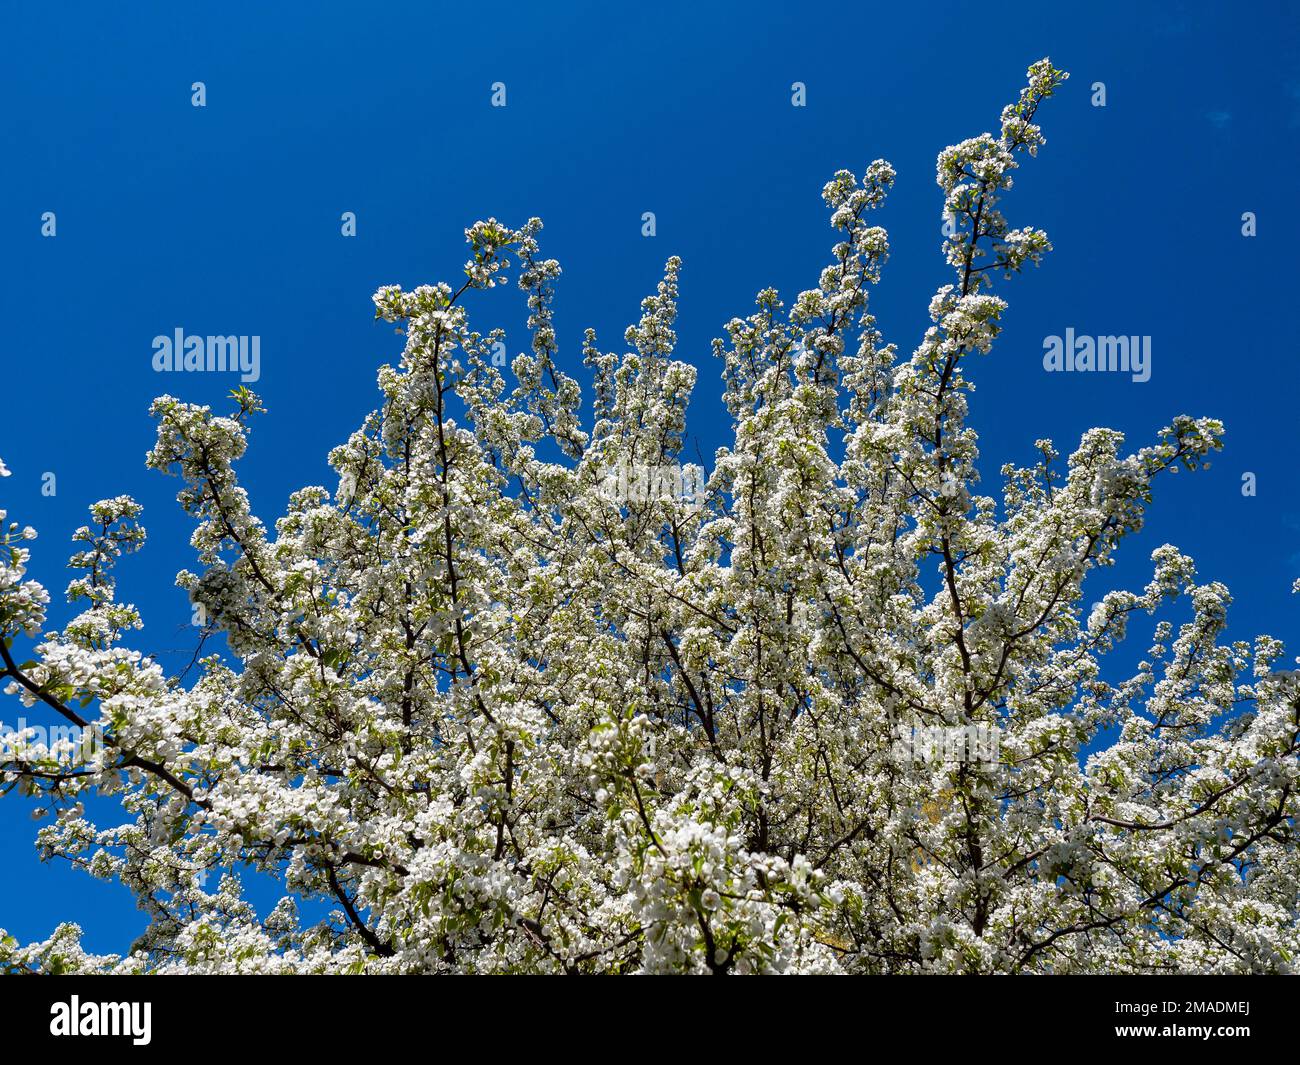 Spring crab apple blossoms: A tree in the Arboretum bursts with white flowers against a deep blue sky Stock Photo